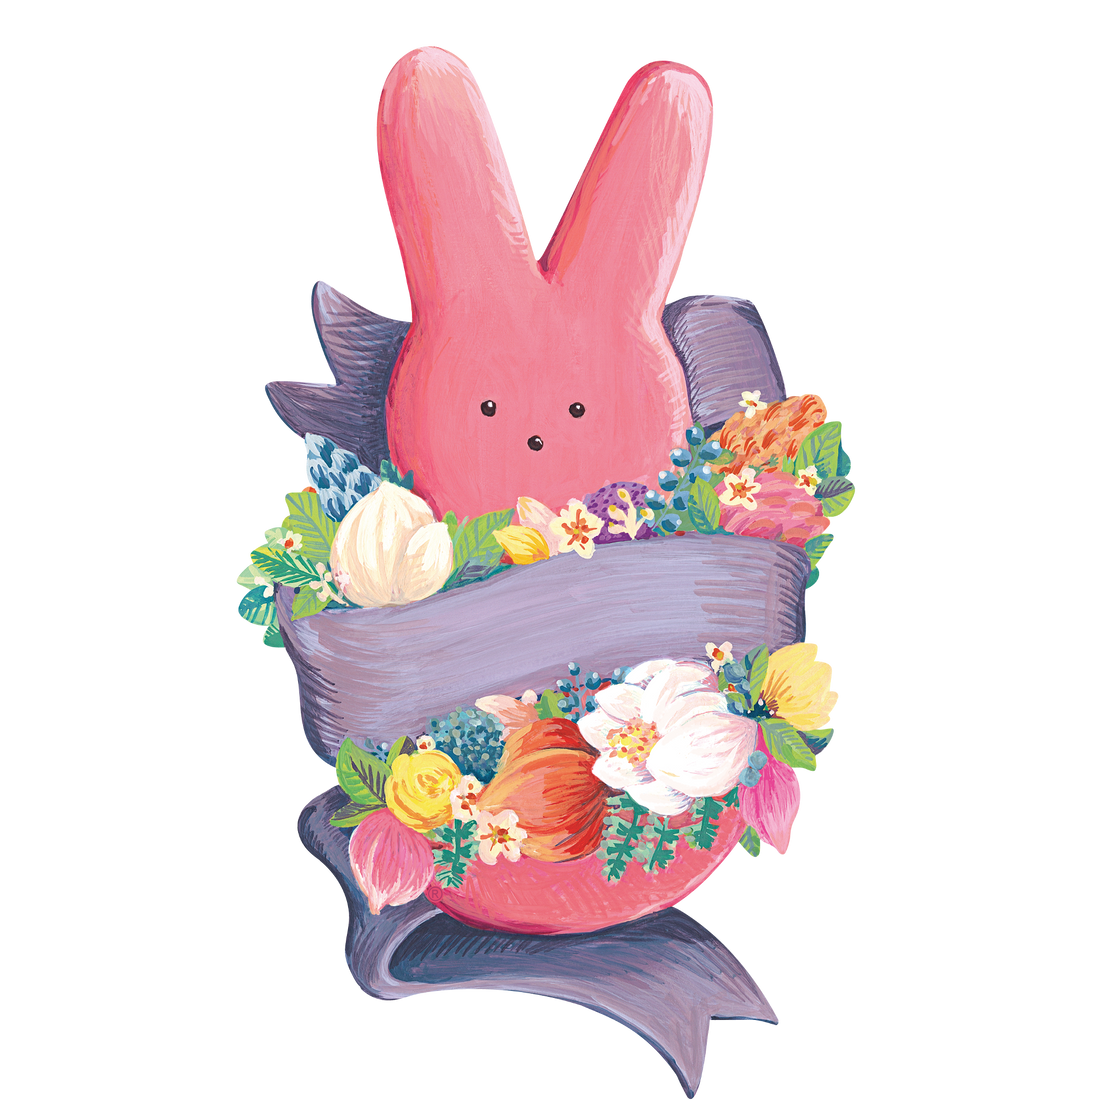 A die-cut illustrated pink PEEPS® Bunny nestled in colorful flowers and wrapped with a lavender ribbon.